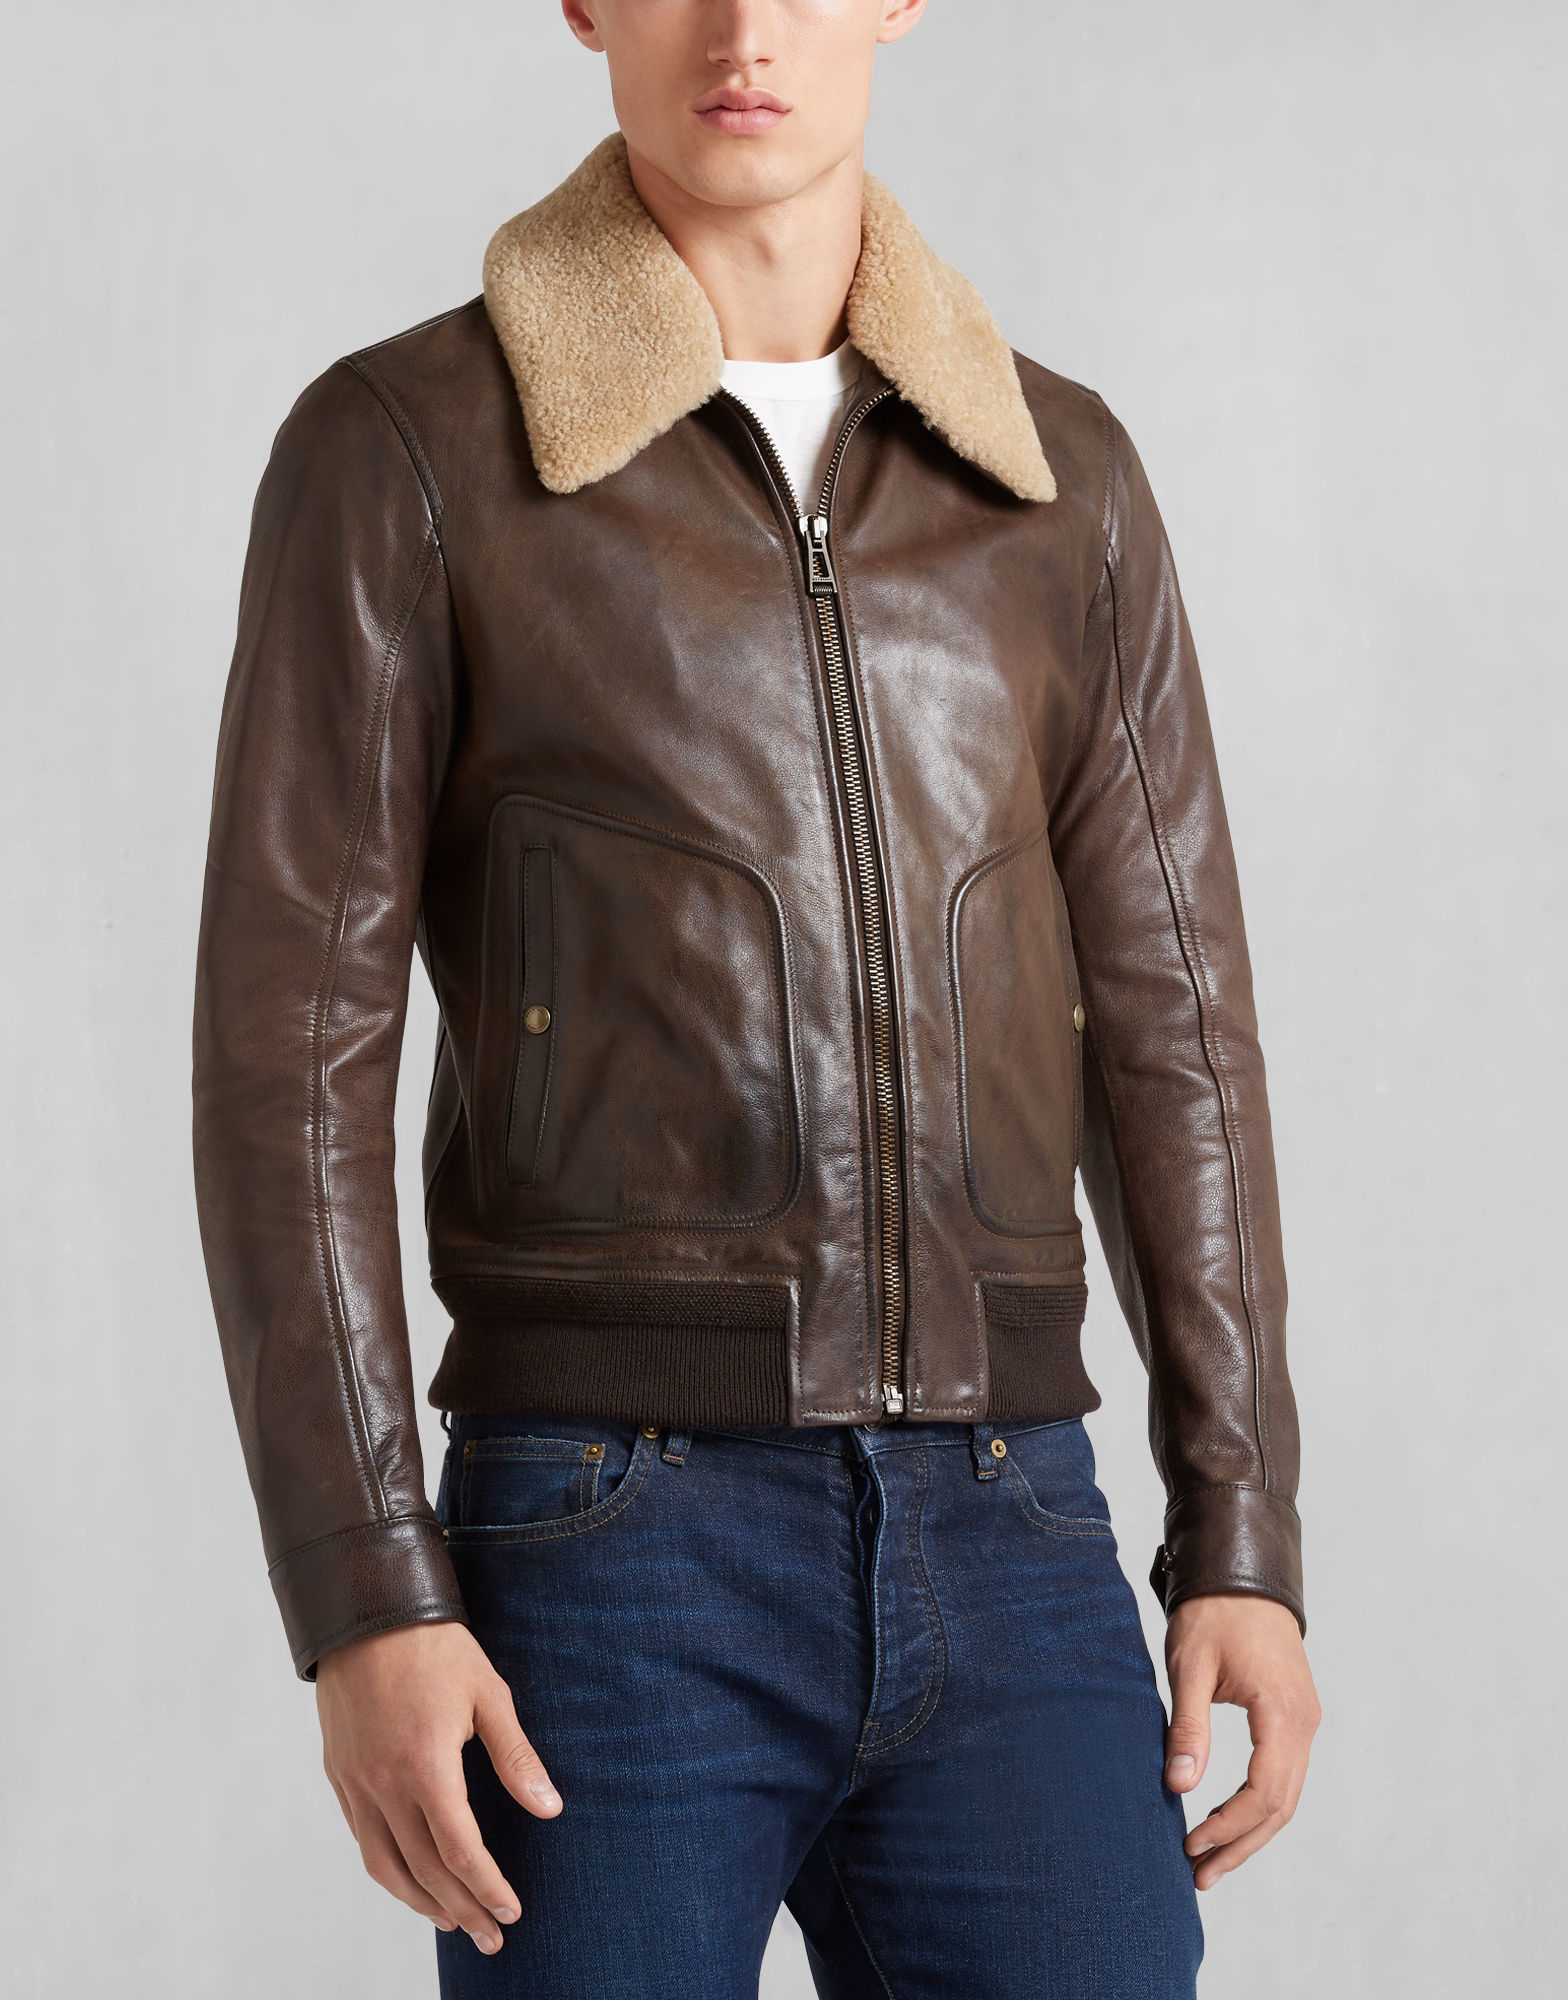 Belstaff Panther Waxed-Leather Jacket in Black/Brown (Brown) for Men - Lyst